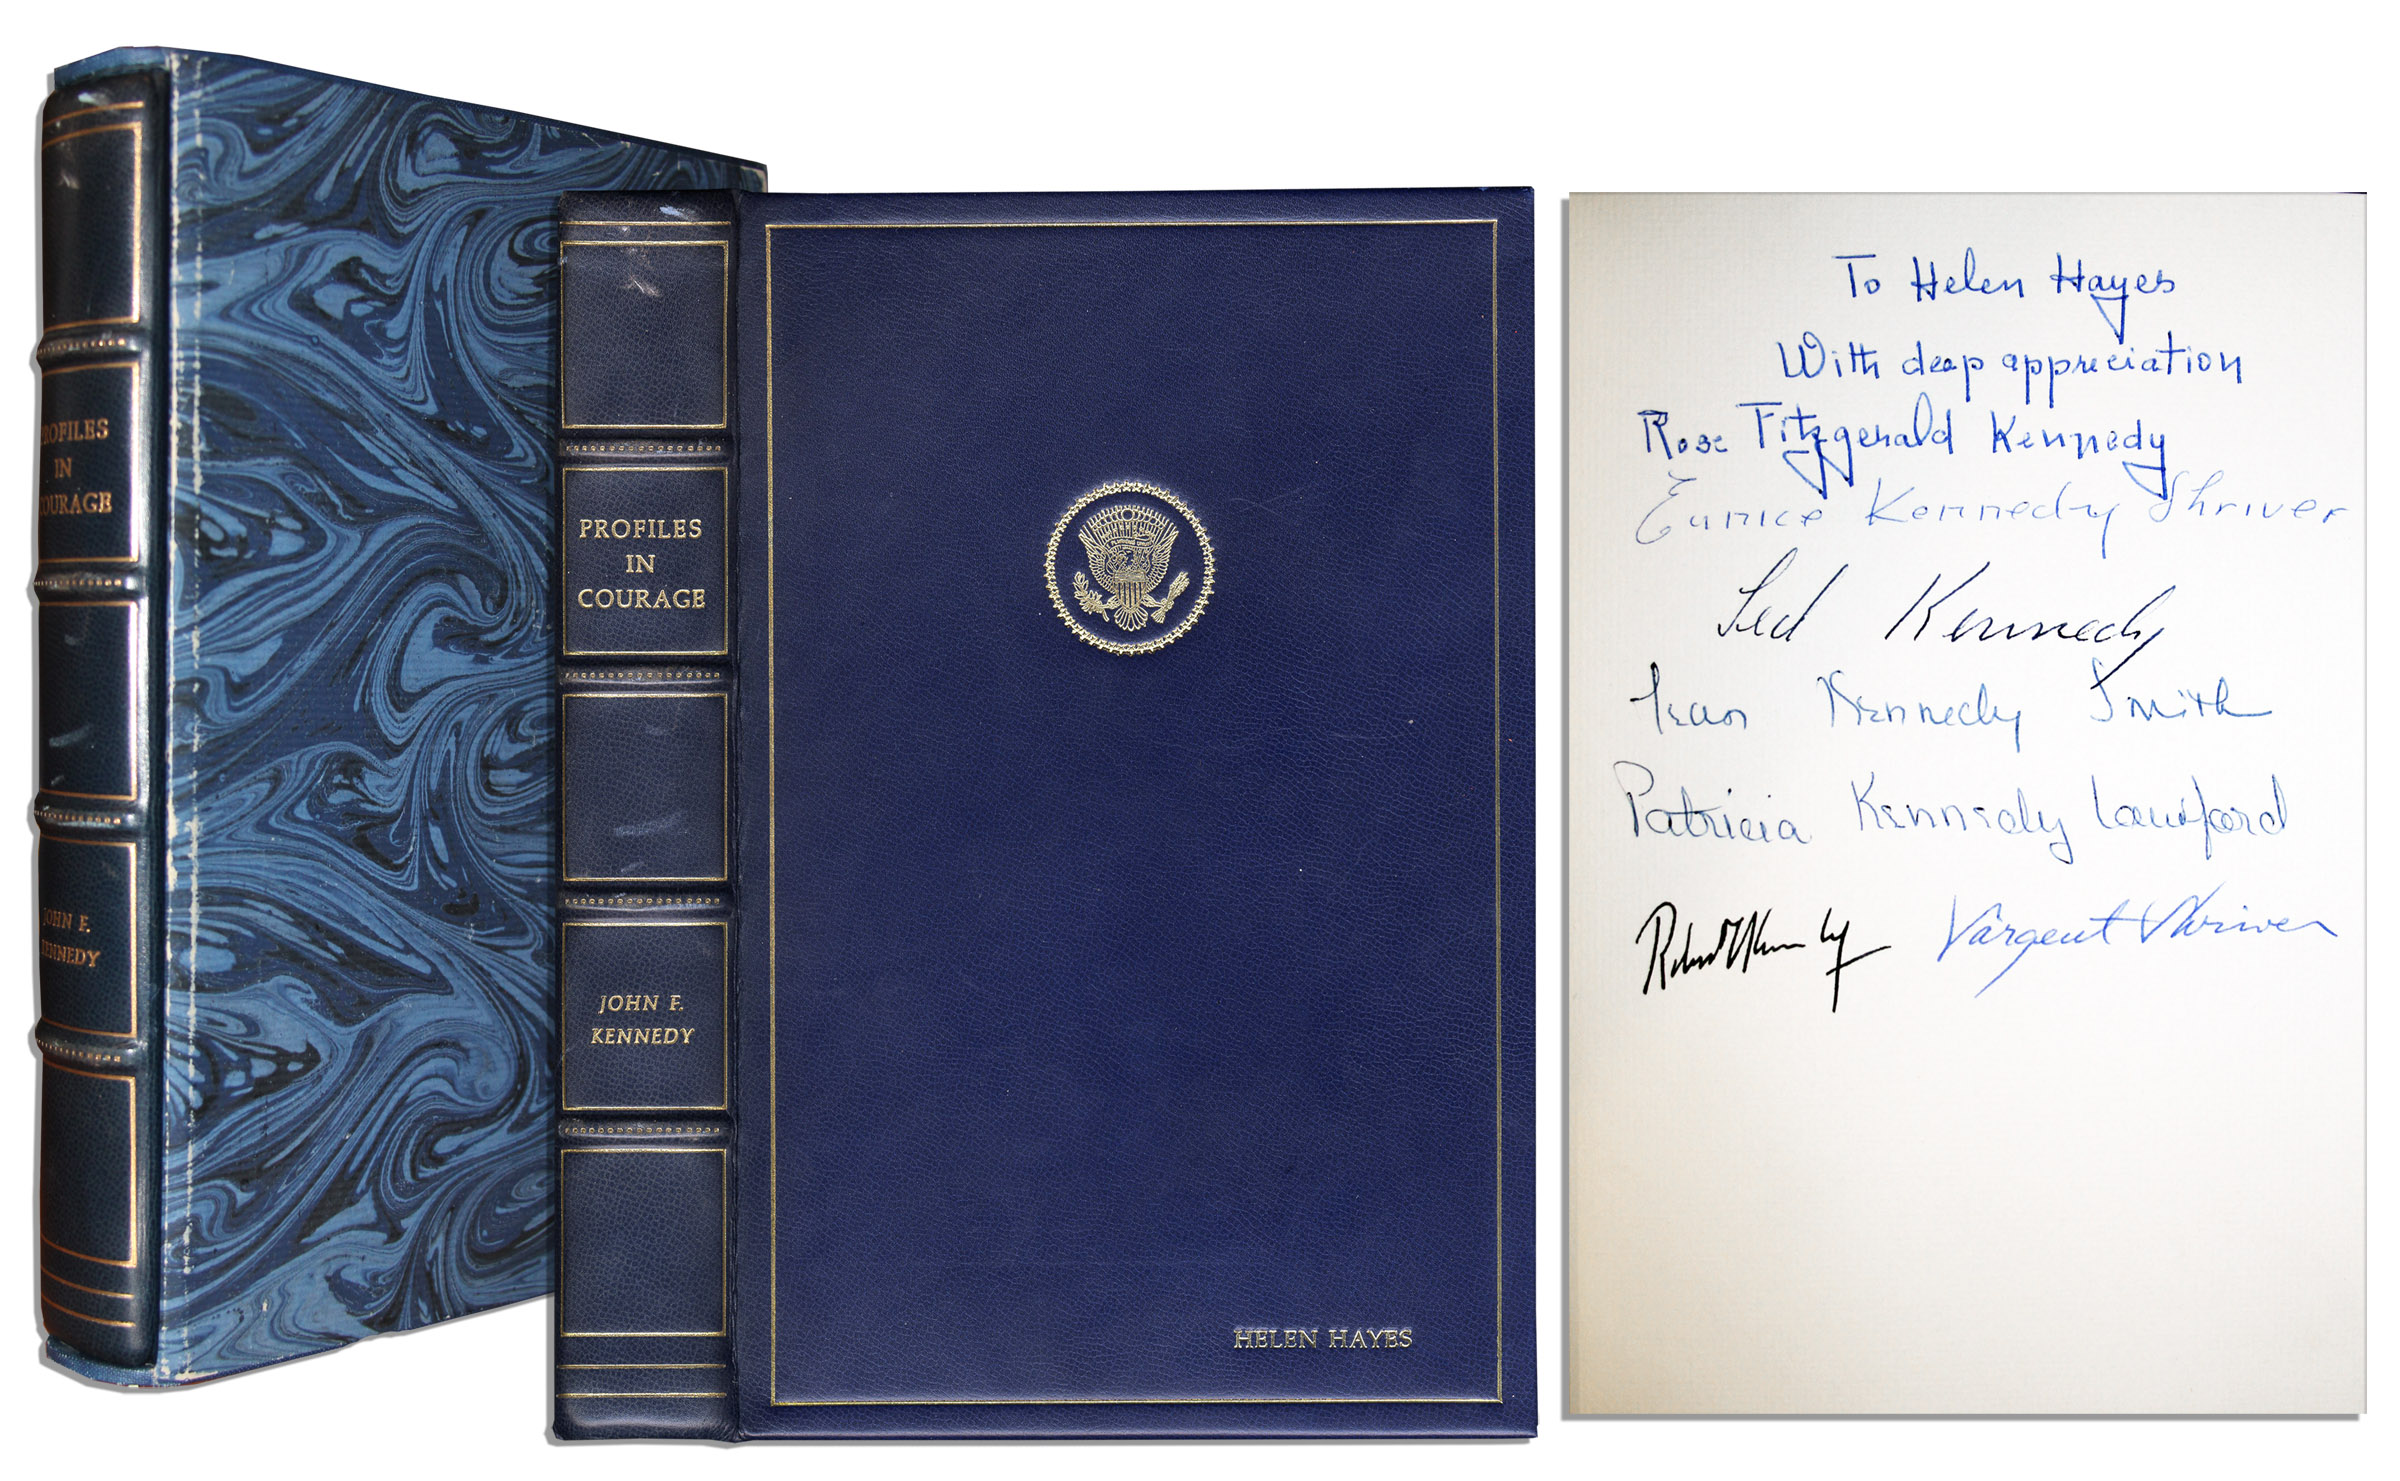 John F Kenndy Profiles in Courage signed  